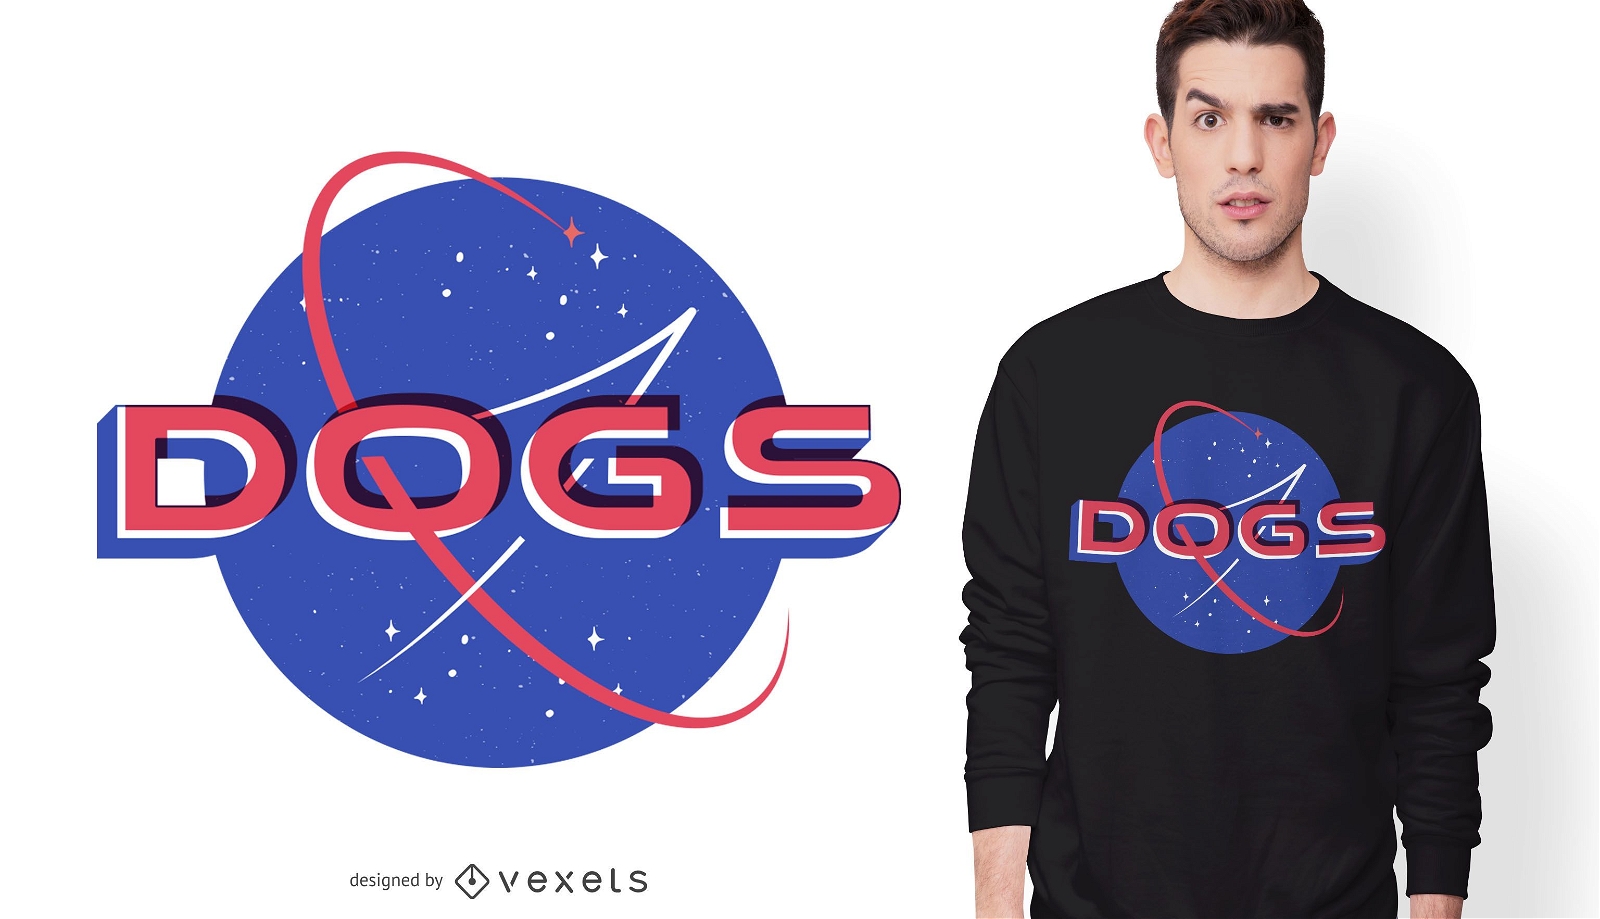 Space dogs t-shirt design